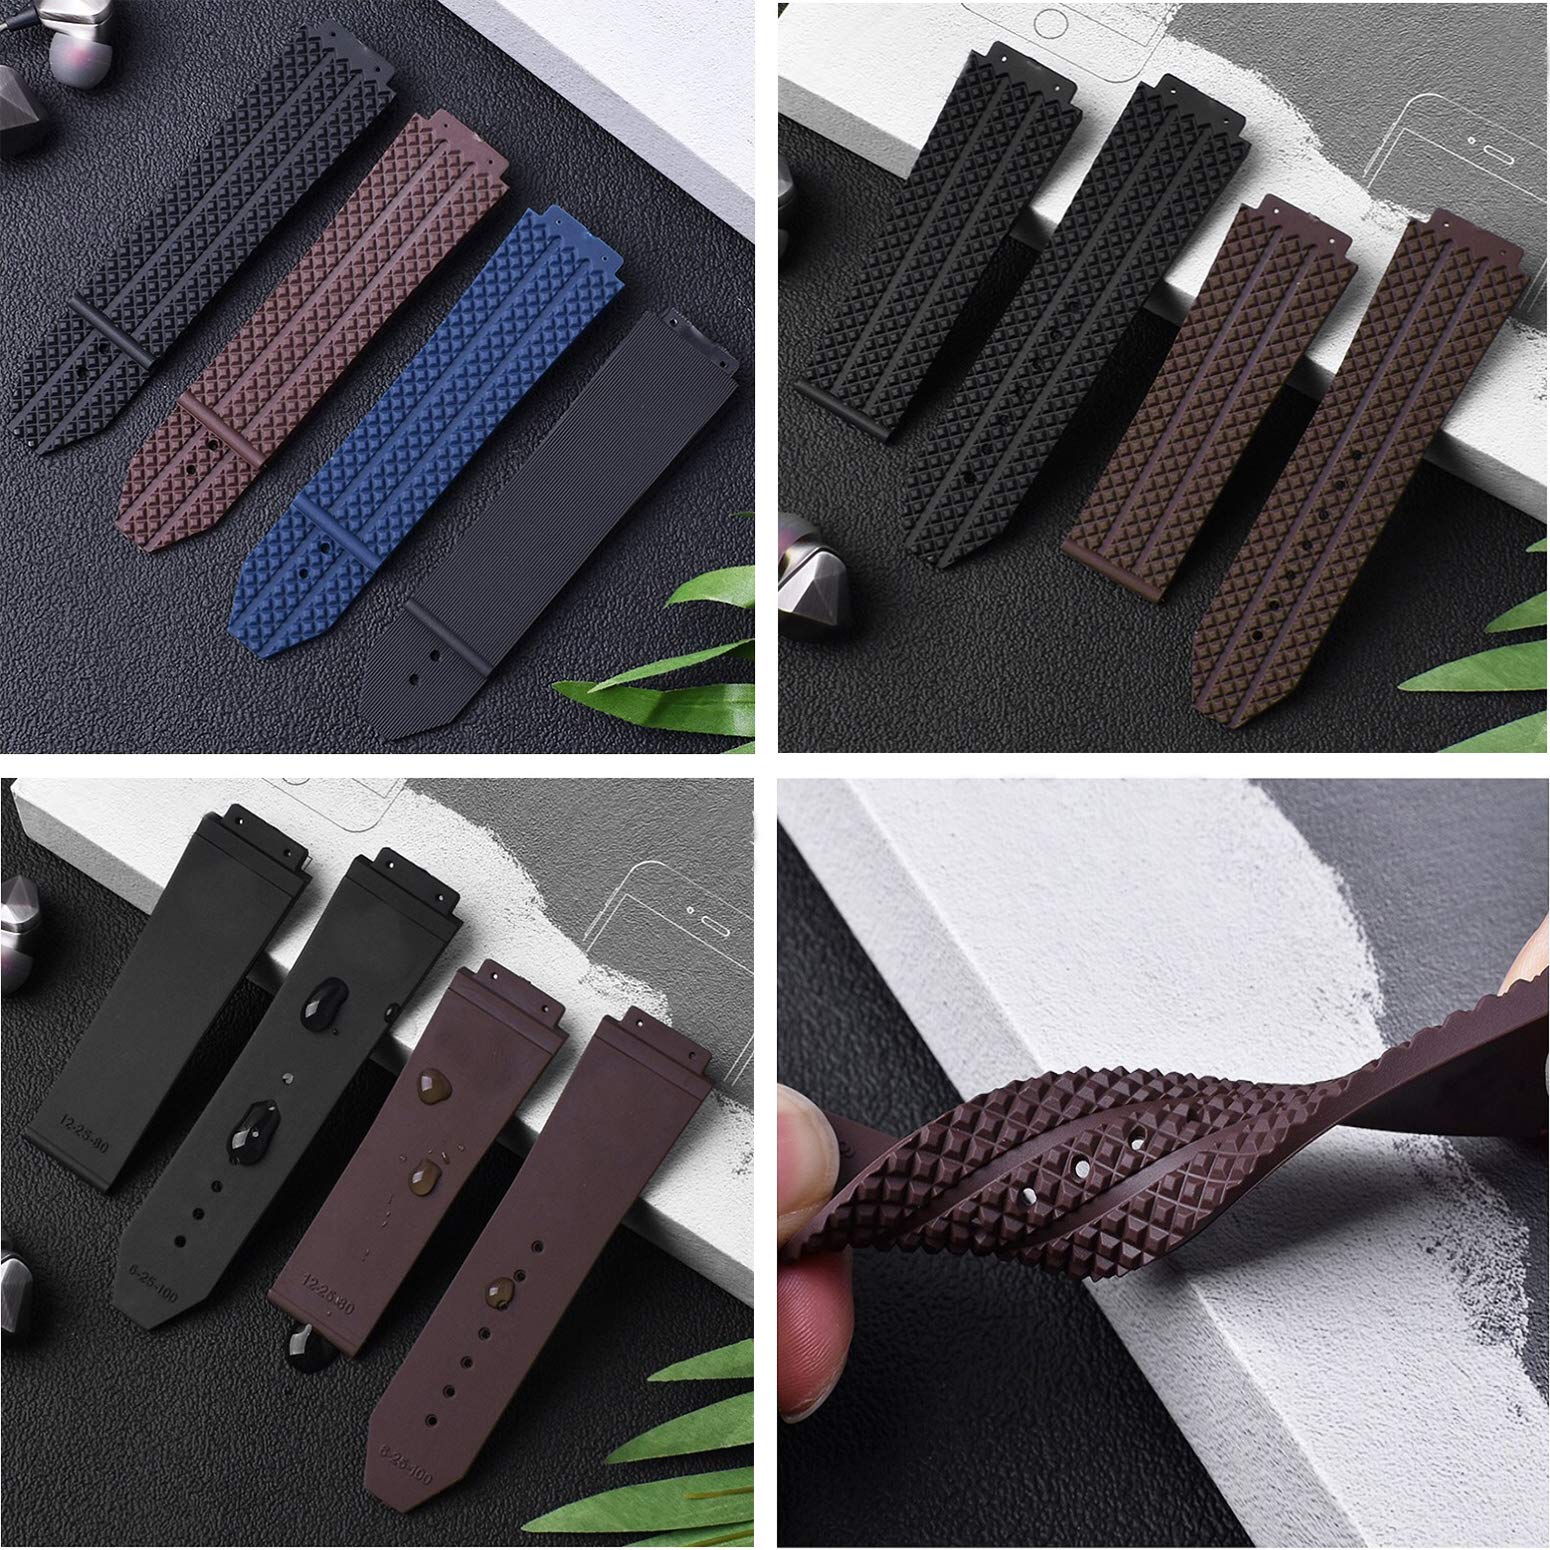 KAMIU 19mm 21mm 25mm Rubber Watch Strap with Replacement Band Tool for Hublot Big Bang